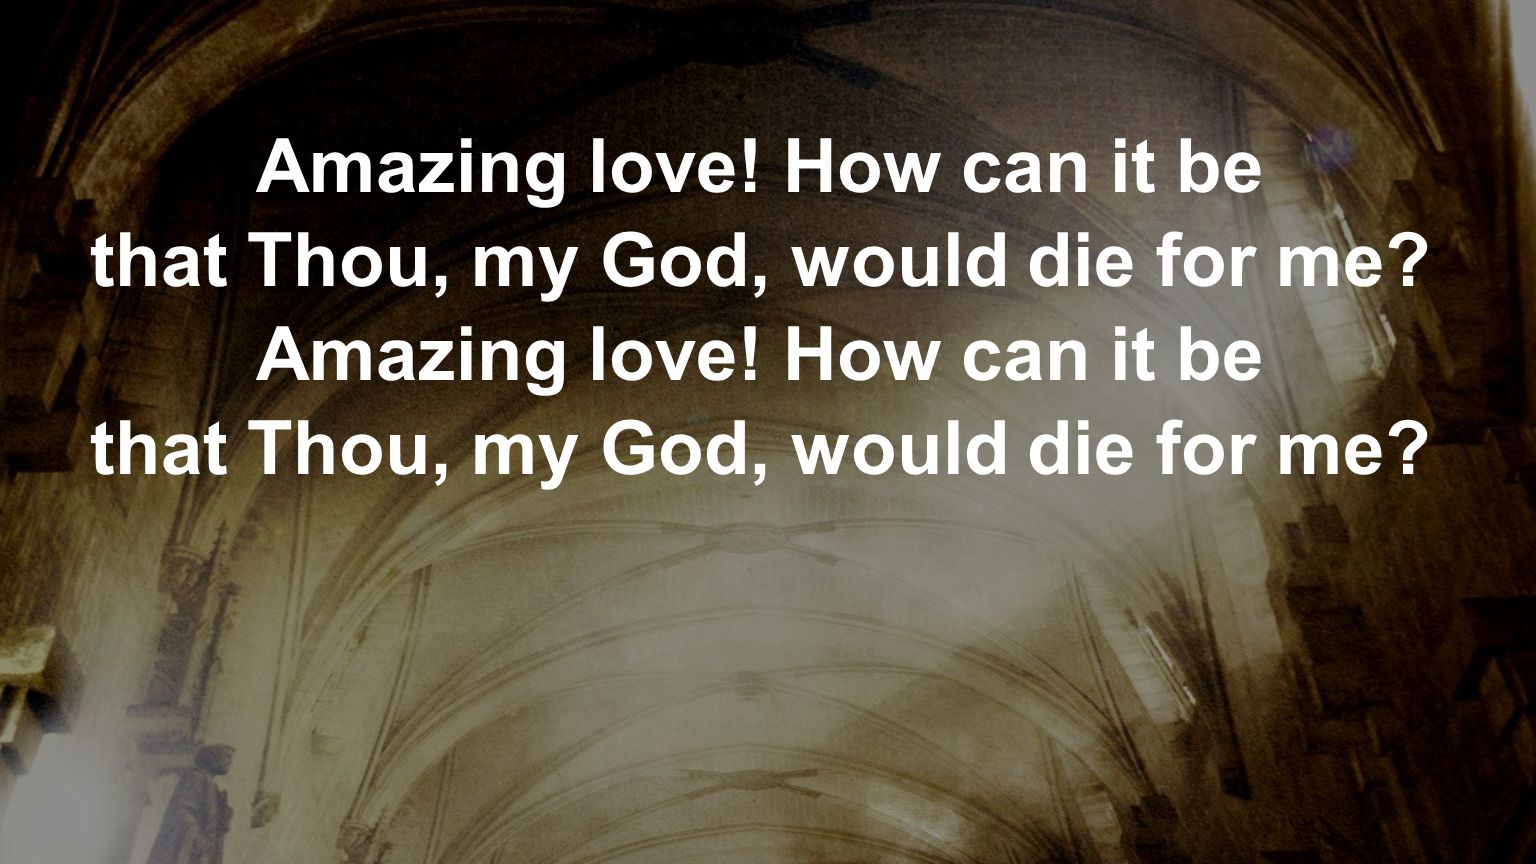 Amazing love! How can it be that Thou, my God, would die for me